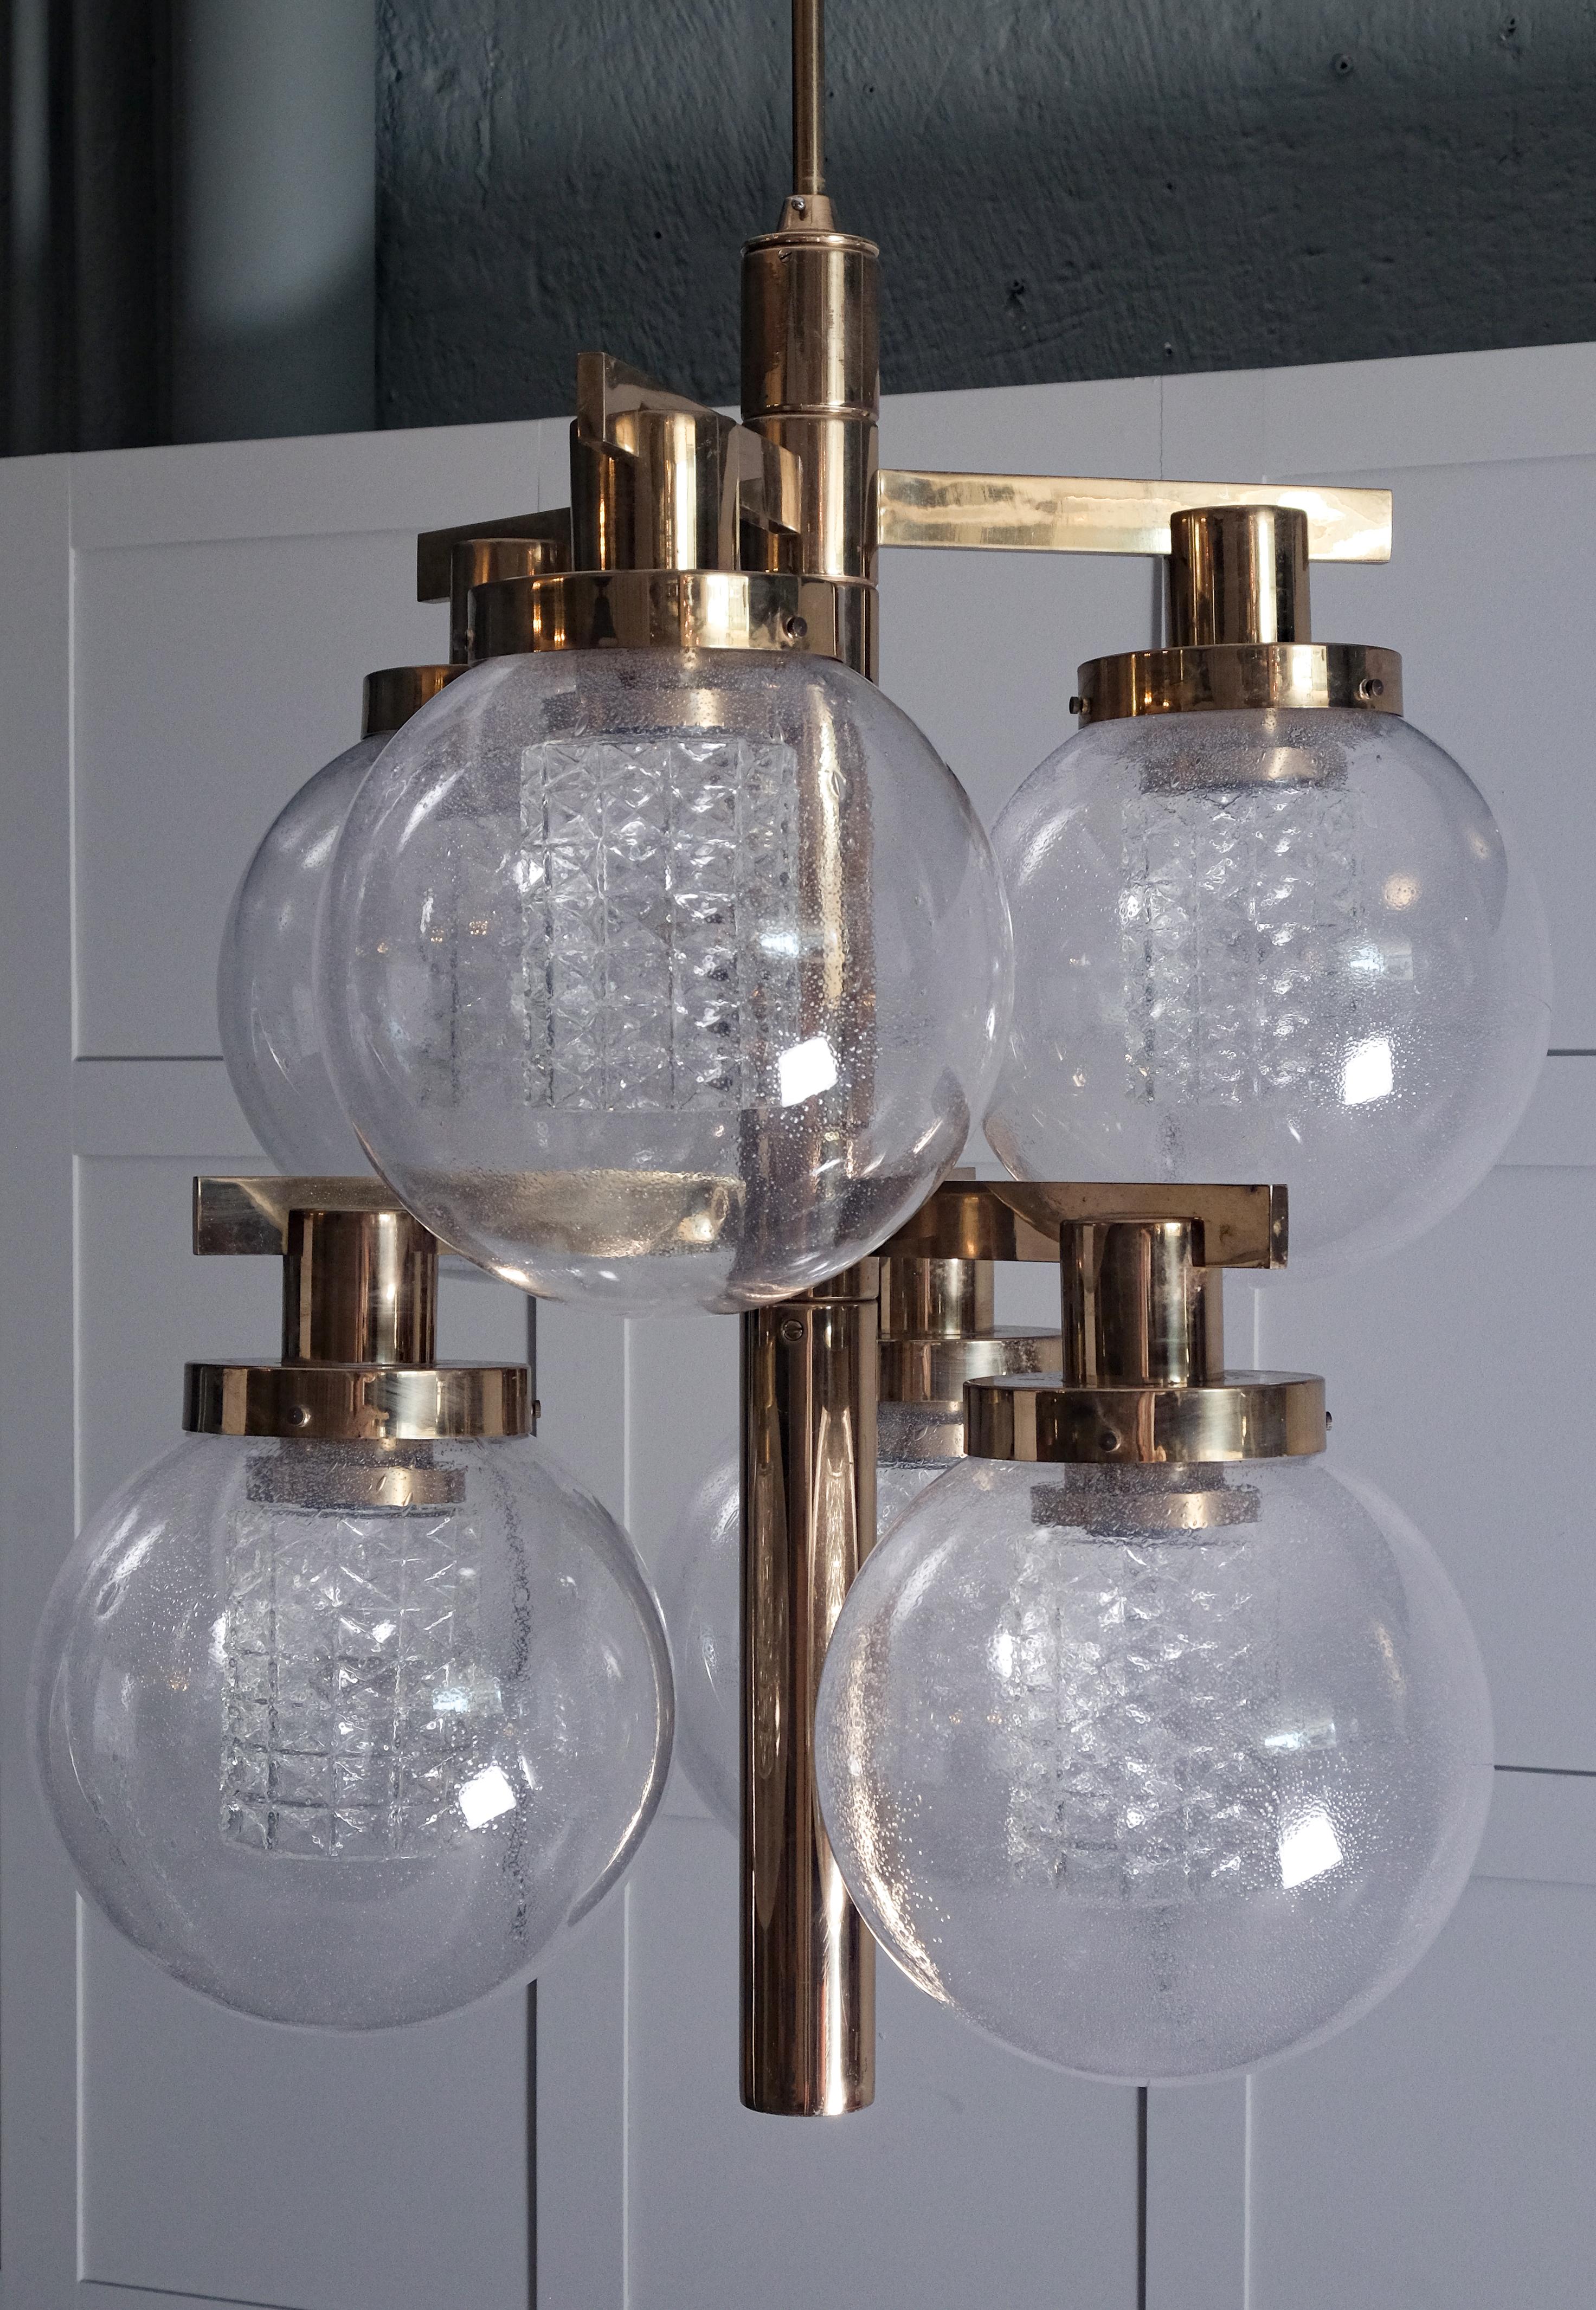 Rare Pair of Hans-Agne Jakobsson Brass Chandeliers, 1960s For Sale 3